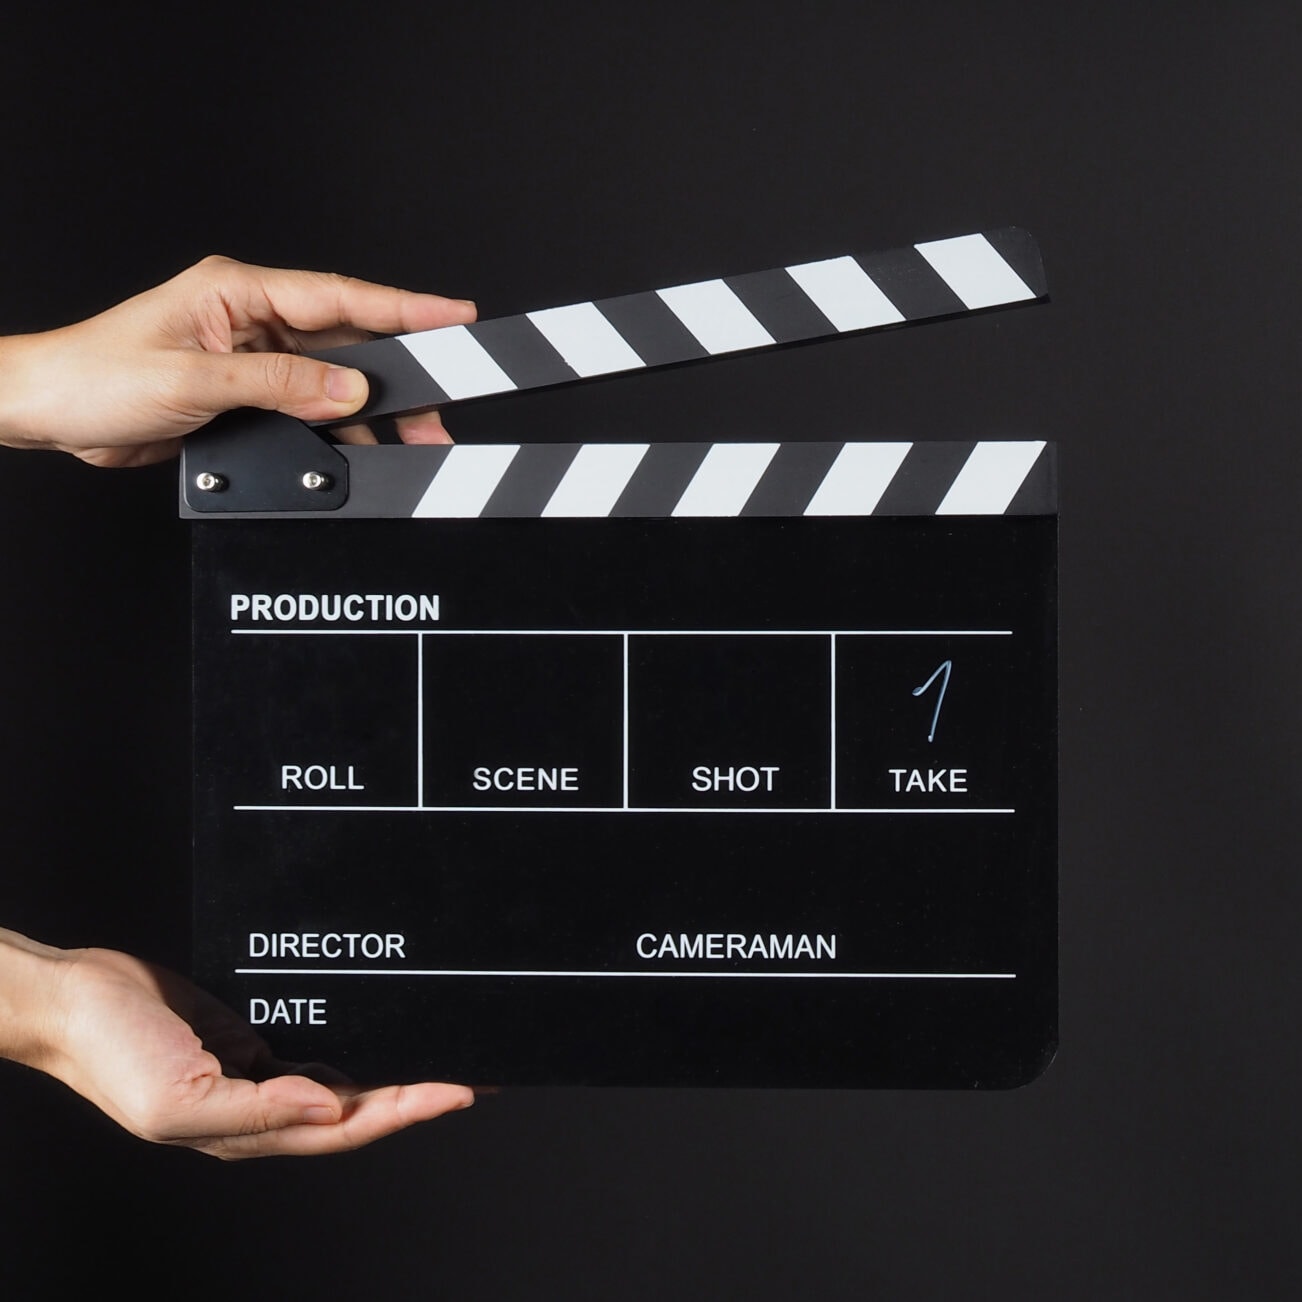 Hand is holding Black clap board or movie slate  use in video production , movie ,film, cinema industry on black background.It have write in number.